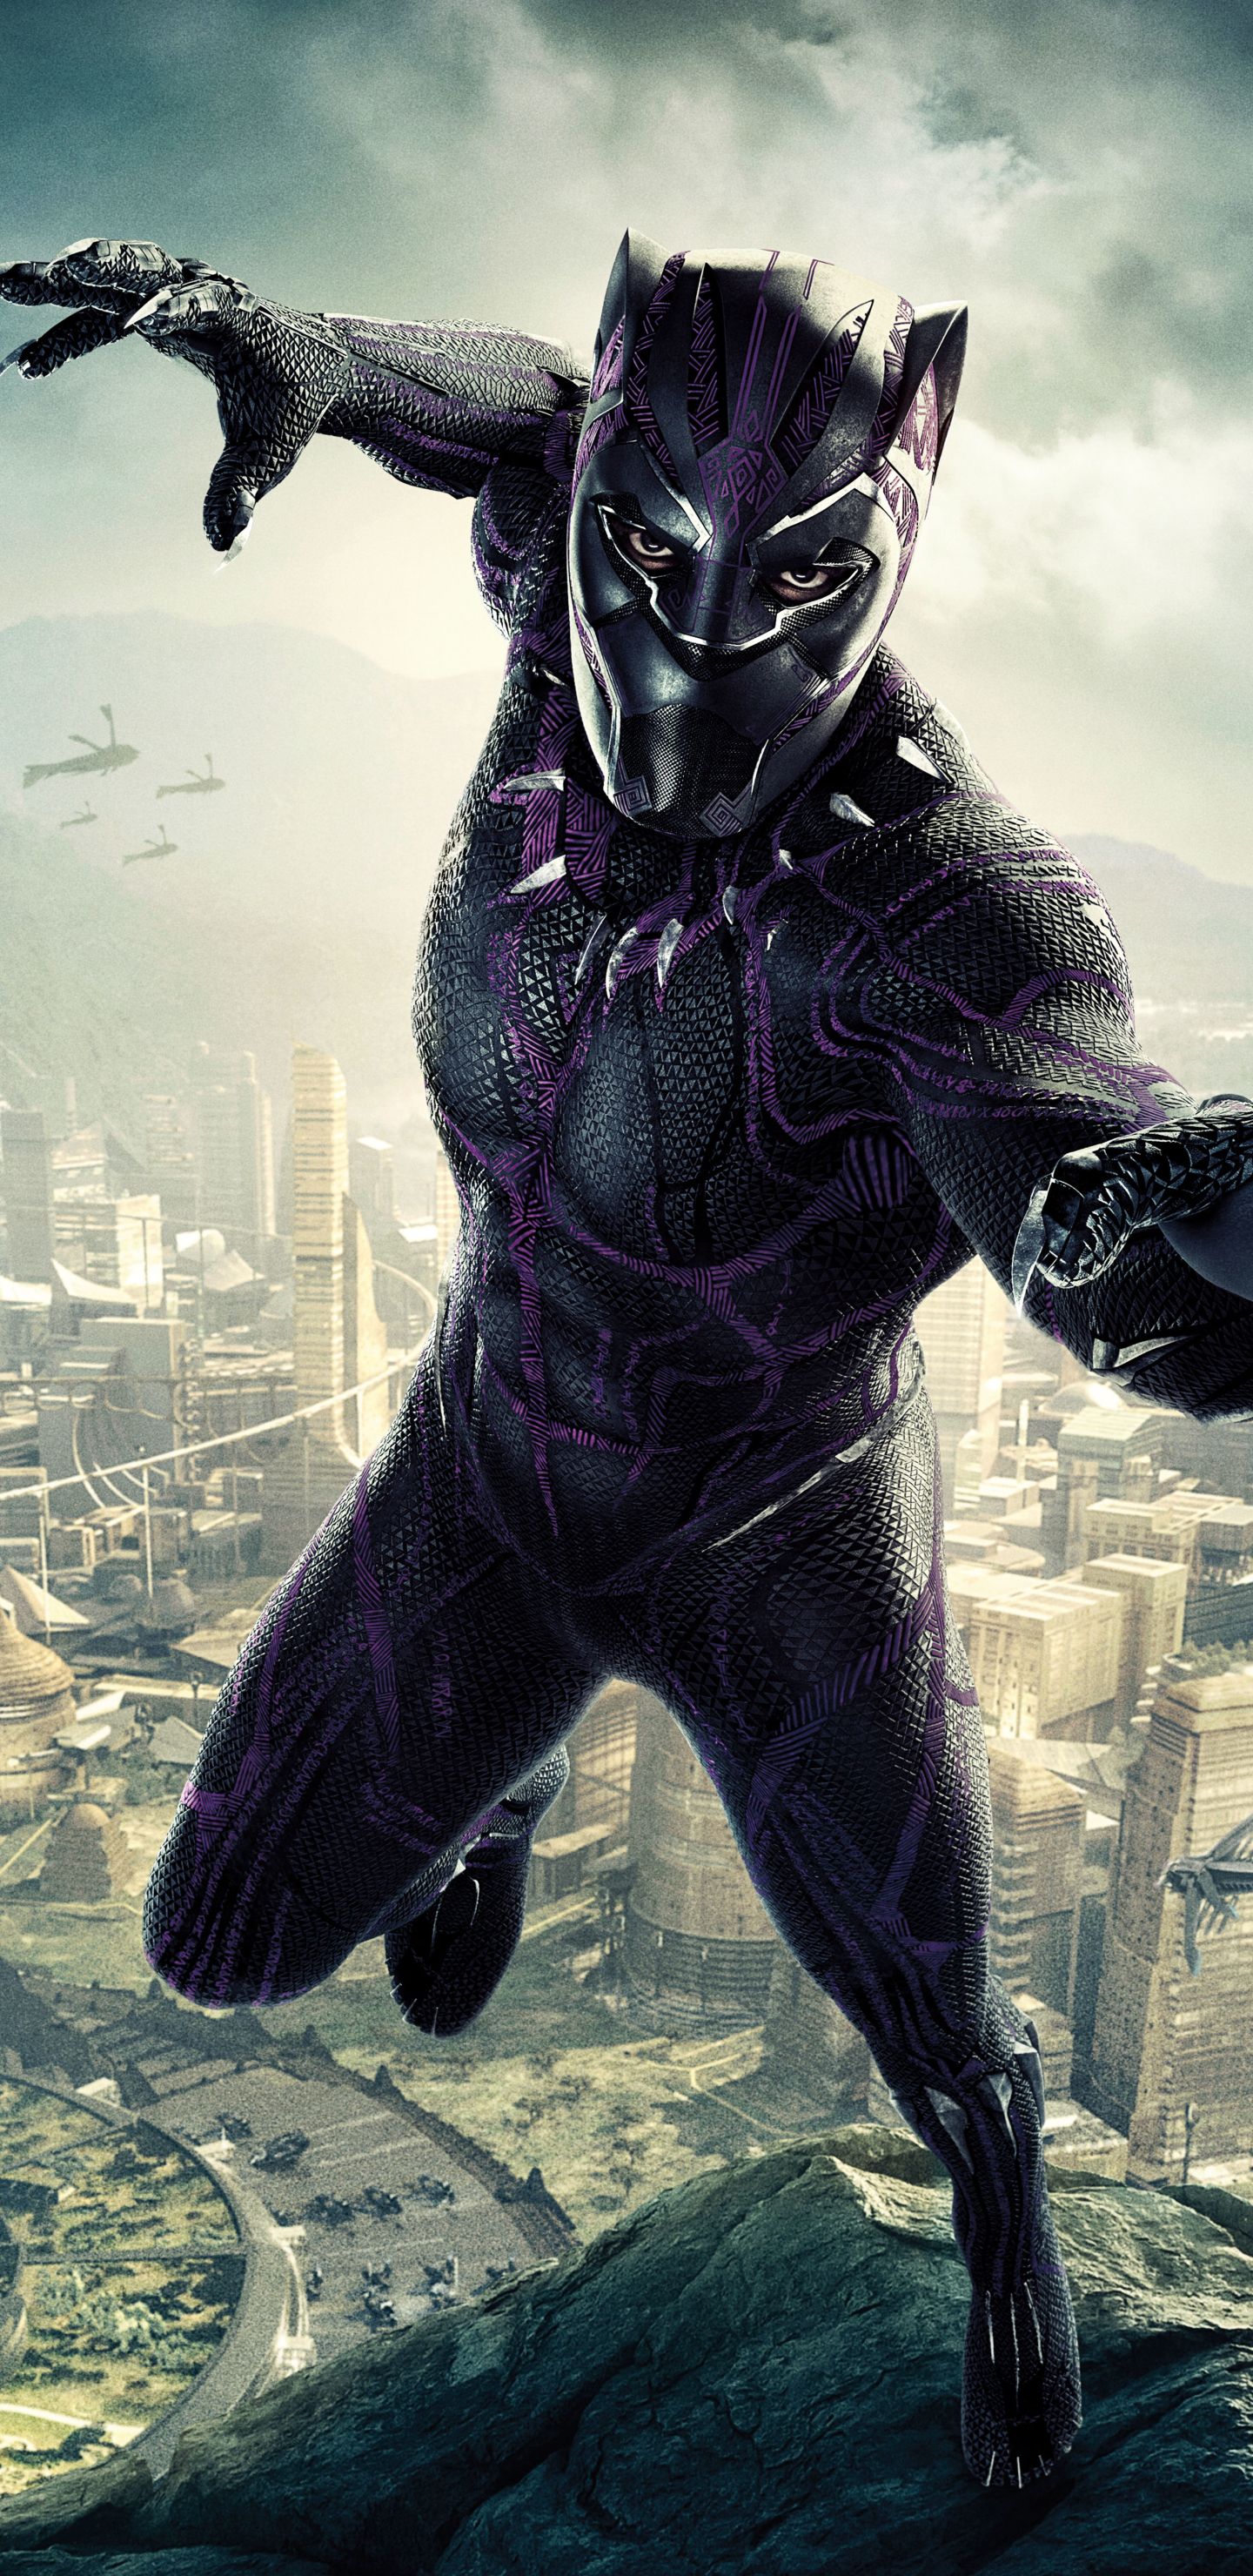 Black Panther Marvel Movie Wallpapers